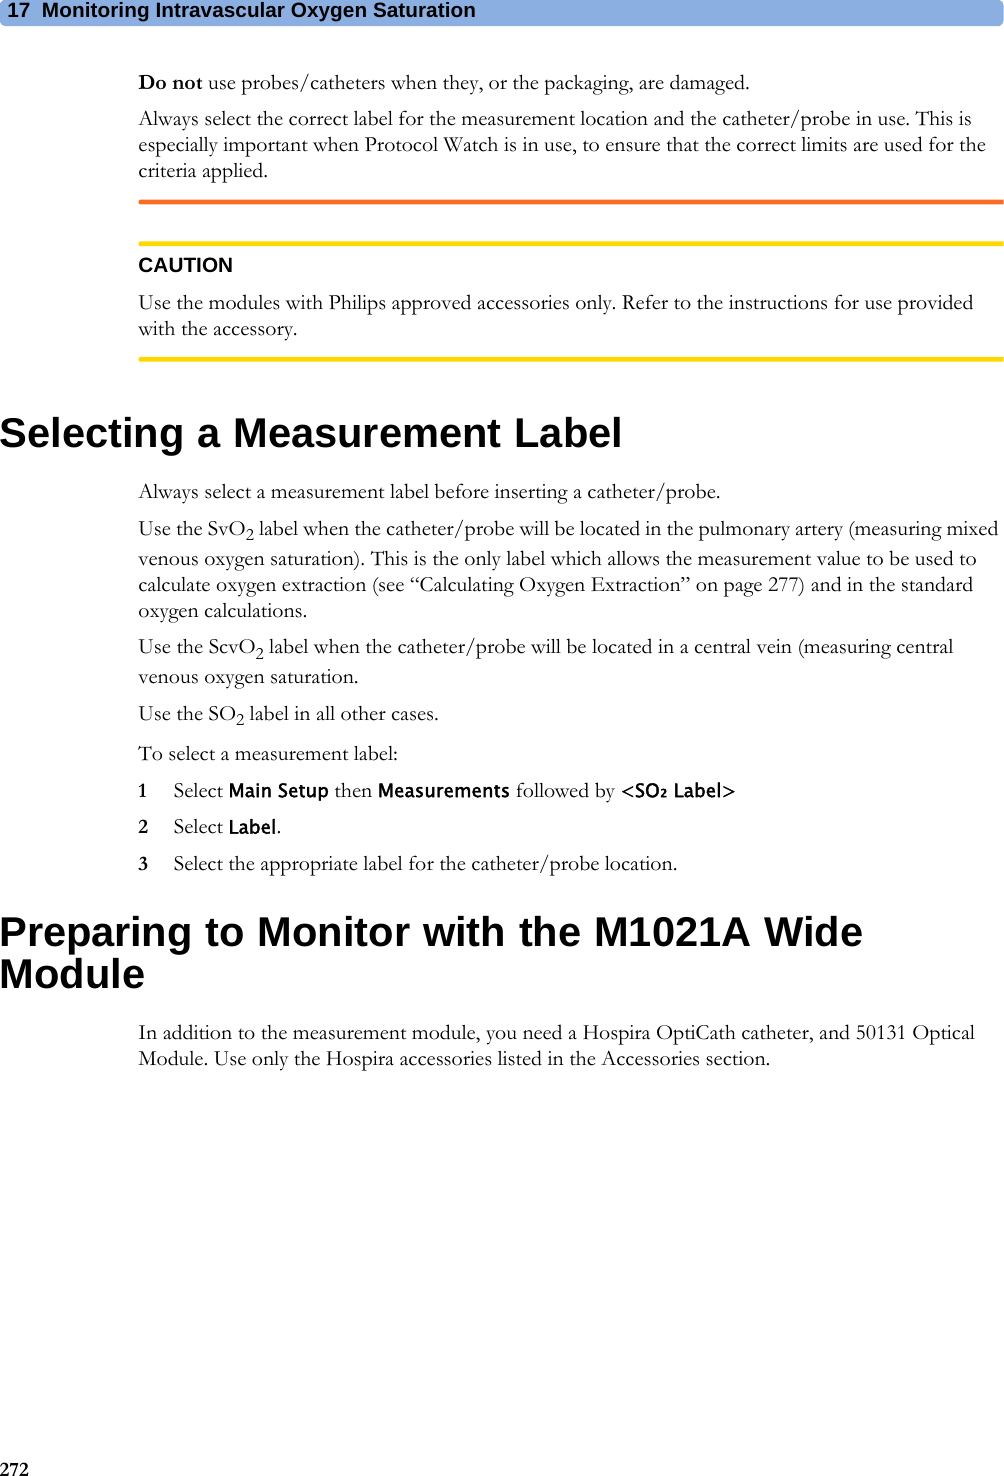 17 Monitoring Intravascular Oxygen Saturation272Do not use probes/catheters when they, or the packaging, are damaged.Always select the correct label for the measurement location and the catheter/probe in use. This is especially important when Protocol Watch is in use, to ensure that the correct limits are used for the criteria applied.CAUTIONUse the modules with Philips approved accessories only. Refer to the instructions for use provided with the accessory.Selecting a Measurement LabelAlways select a measurement label before inserting a catheter/probe.Use the SvO2 label when the catheter/probe will be located in the pulmonary artery (measuring mixed venous oxygen saturation). This is the only label which allows the measurement value to be used to calculate oxygen extraction (see “Calculating Oxygen Extraction” on page 277) and in the standard oxygen calculations.Use the ScvO2 label when the catheter/probe will be located in a central vein (measuring central venous oxygen saturation.Use the SO2 label in all other cases.To select a measurement label:1Select Main Setup then Measurements followed by &lt;SO₂ Label&gt;2Select Label.3Select the appropriate label for the catheter/probe location.Preparing to Monitor with the M1021A Wide ModuleIn addition to the measurement module, you need a Hospira OptiCath catheter, and 50131 Optical Module. Use only the Hospira accessories listed in the Accessories section.